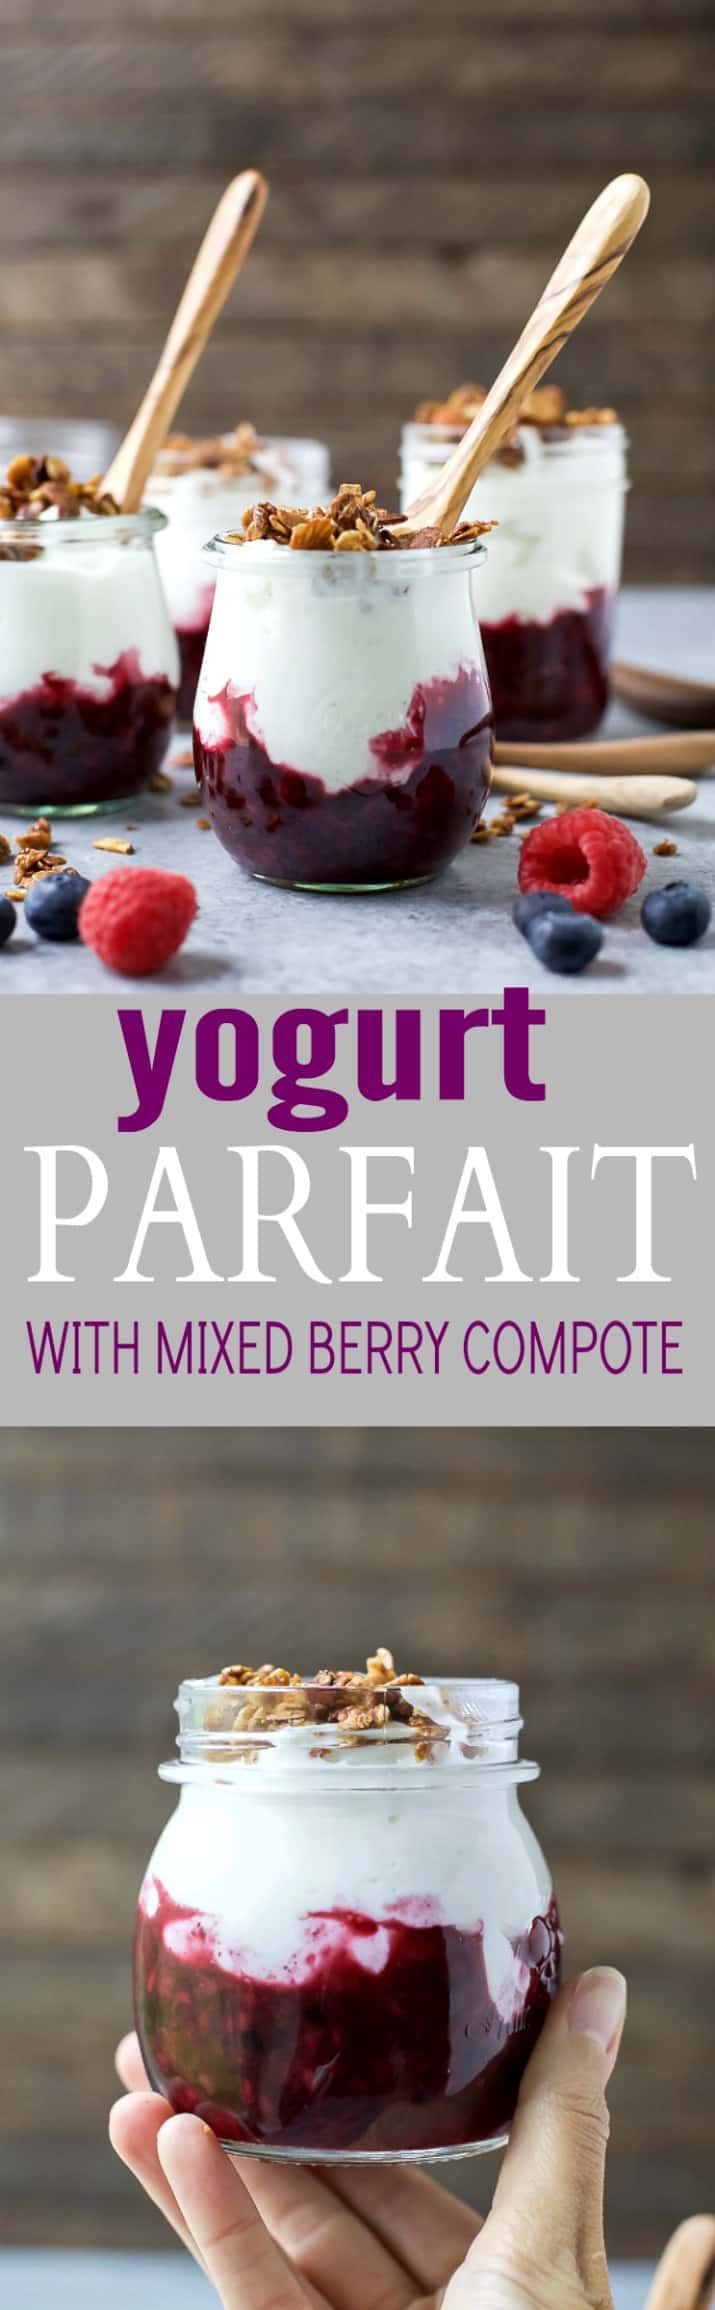 Collage for Yogurt Parfait with a Mixed Berry Compote recipe